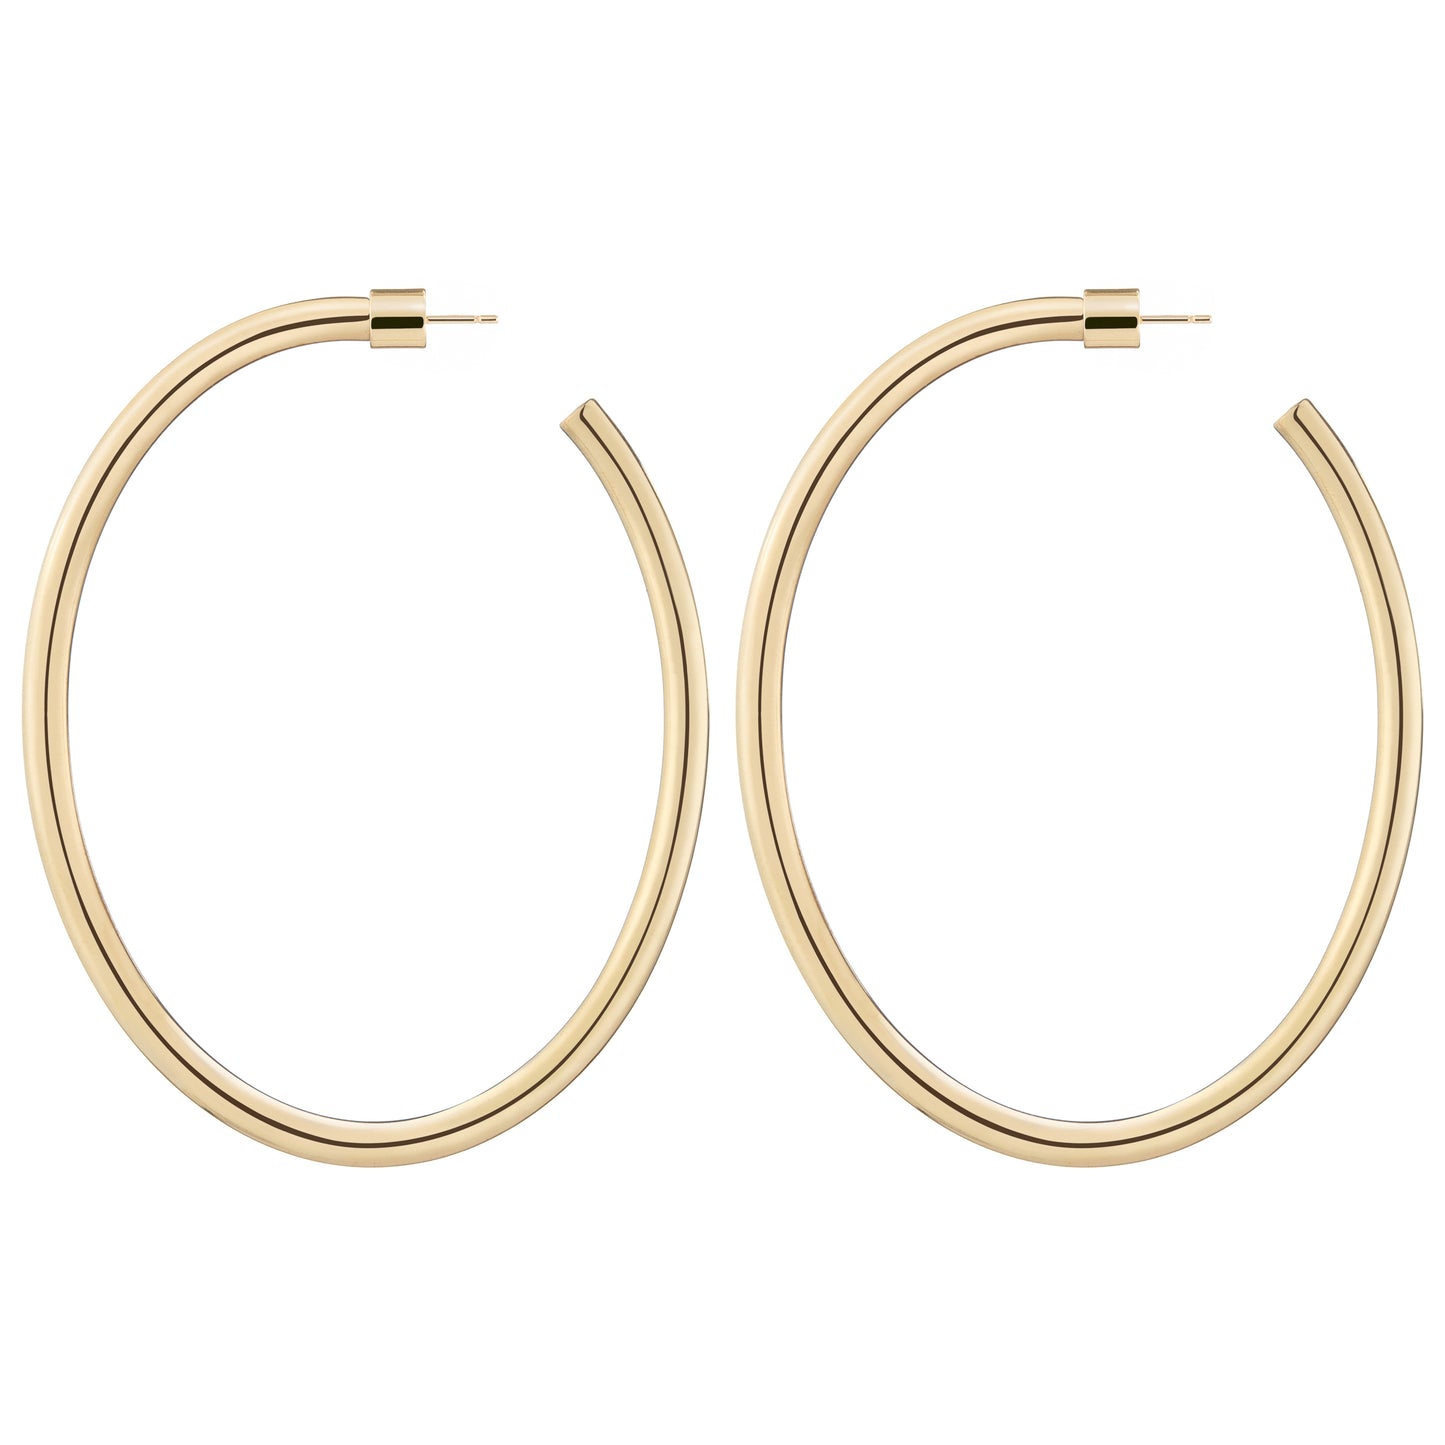 2.5" Thin Law Hoops